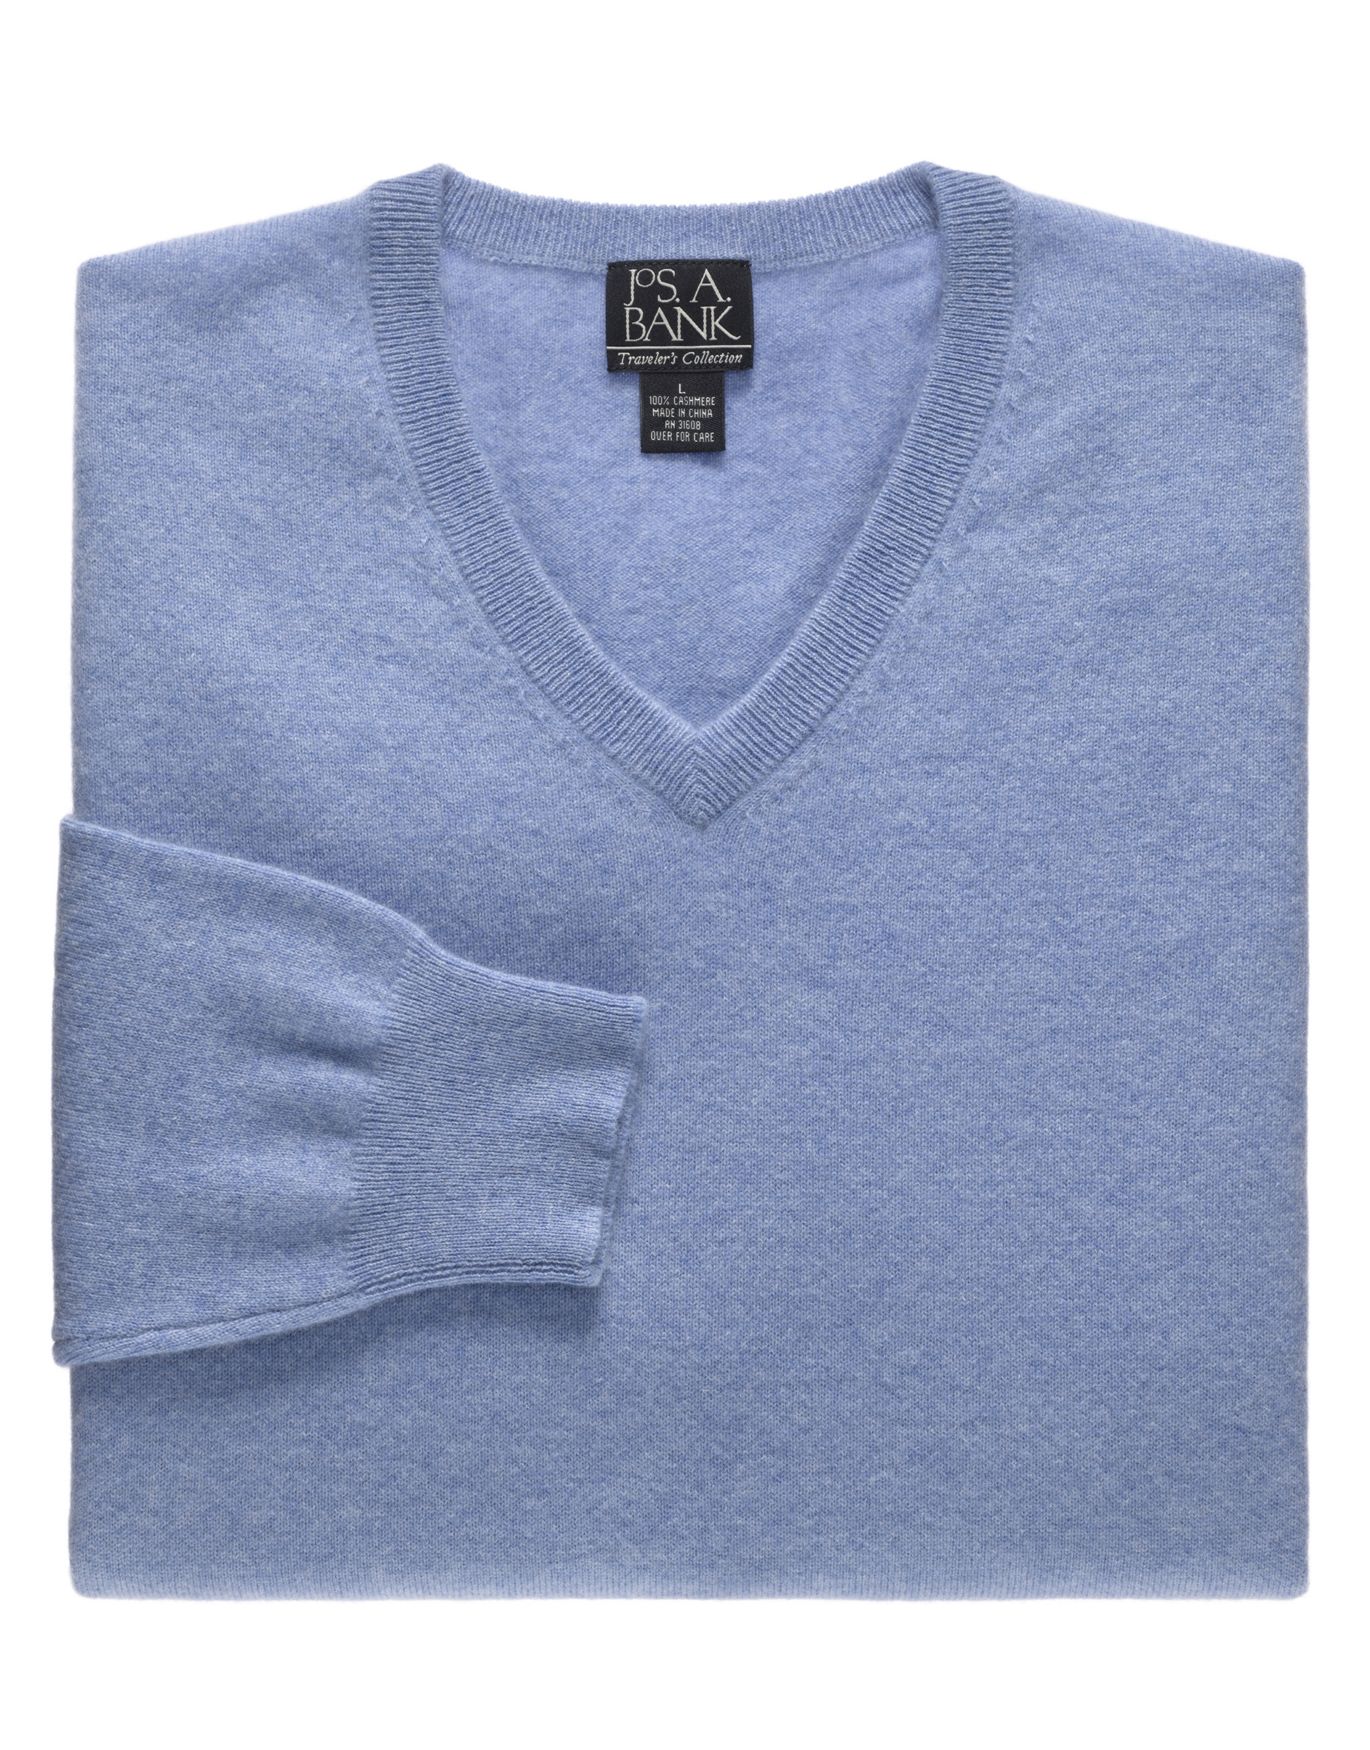 Cashmere Sweaters | Men's Sweaters | JoS. A. Bank Clothiers